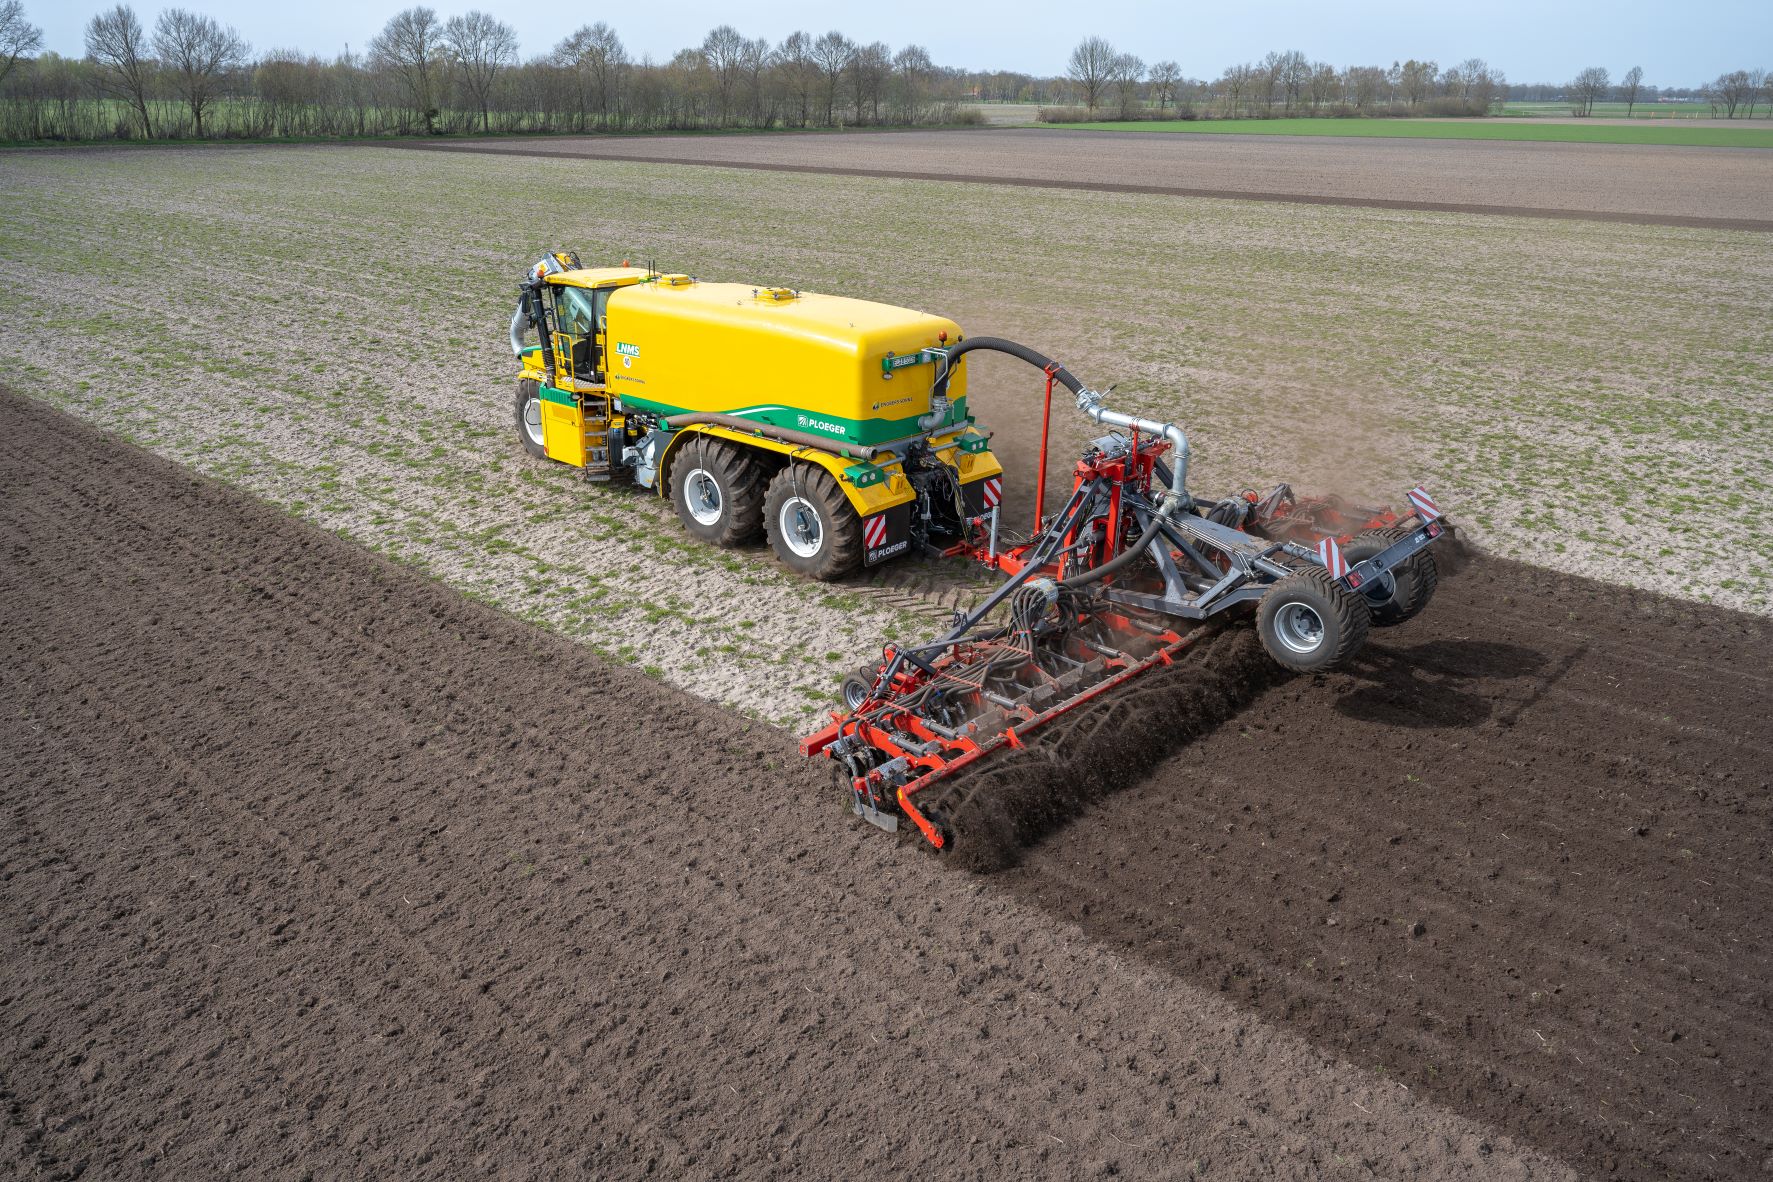  Evers Toric XL 1200 slurry disc injector - slurry incorporation across a large working width